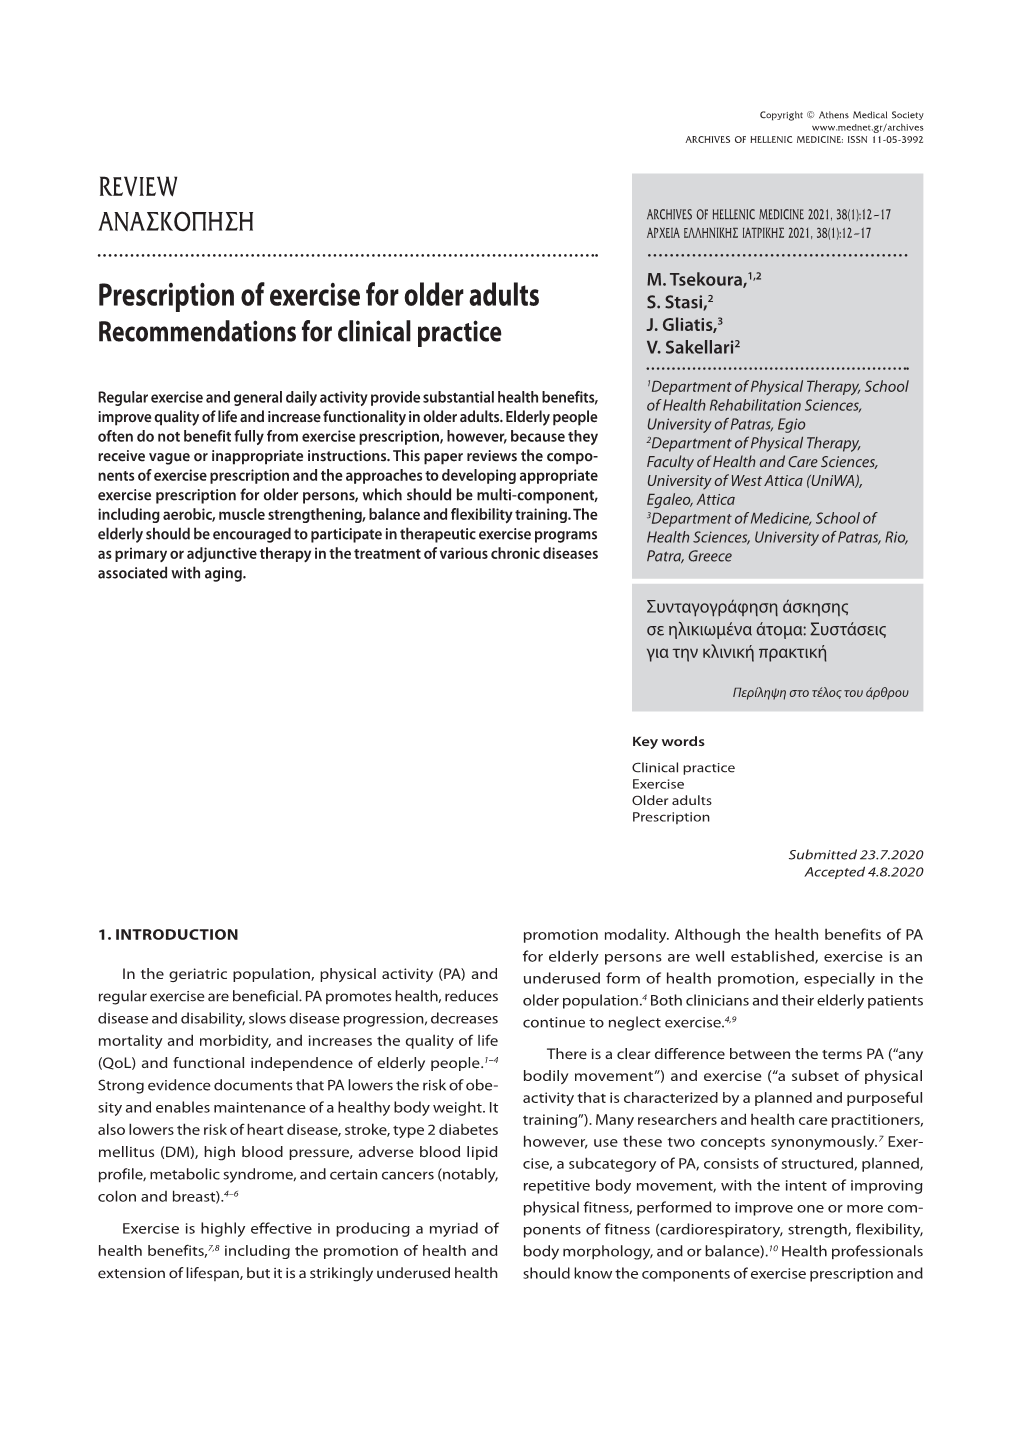 Prescription of Exercise for Older Adults S